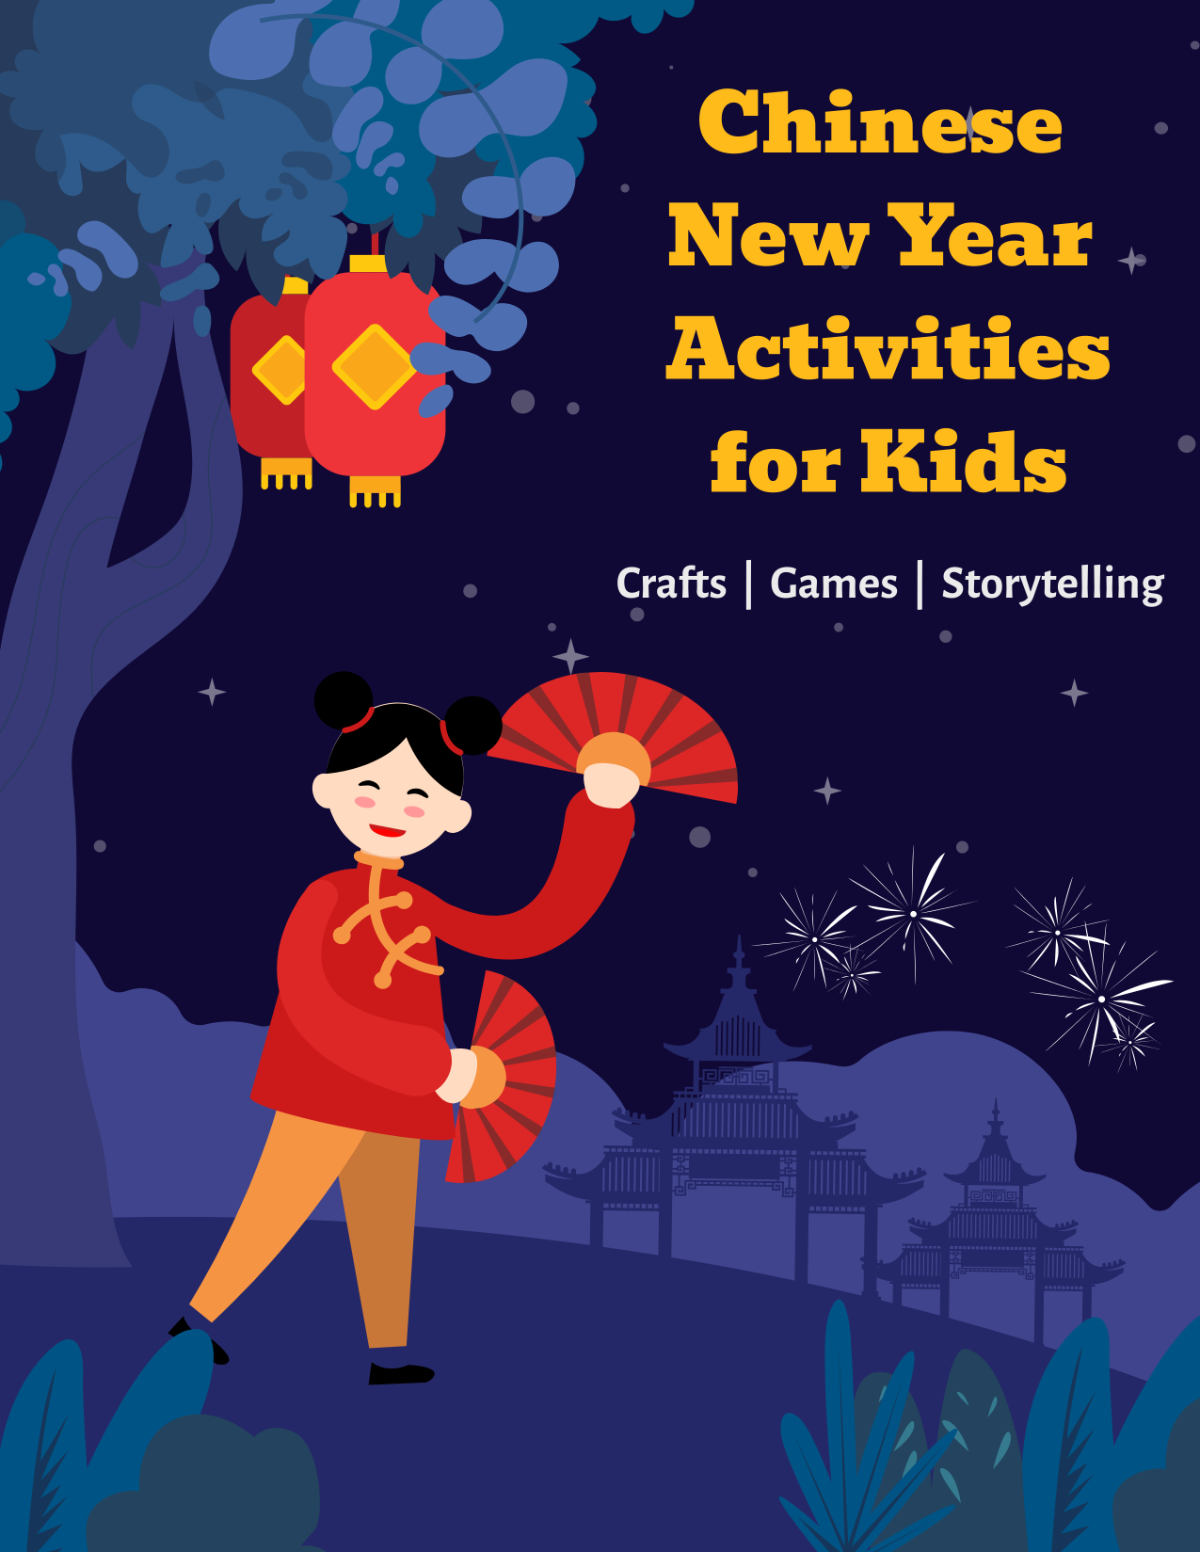 Chinese New Year Kid Activities Flyer Template